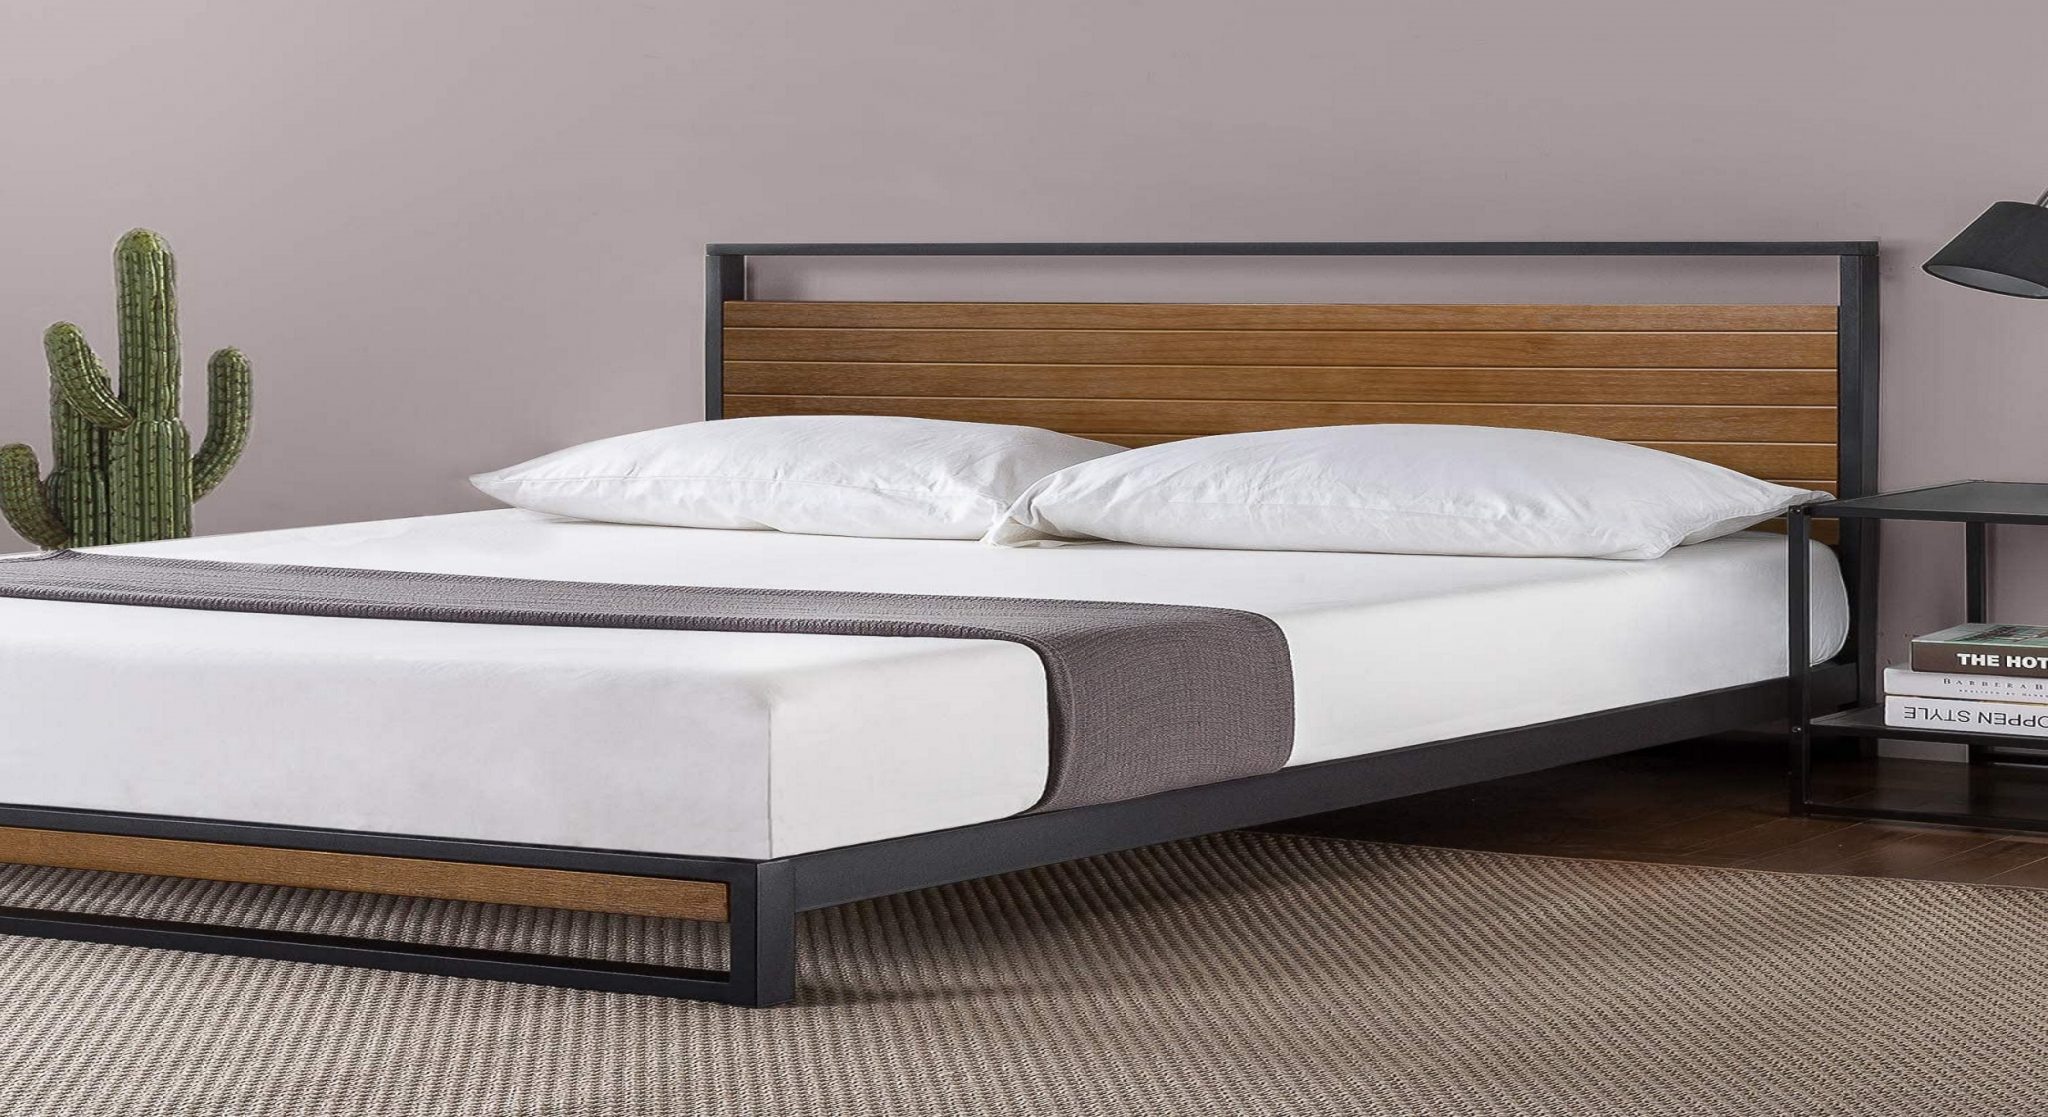 Best King Size Bed Frame With Headboard [2023] & Top Reviews